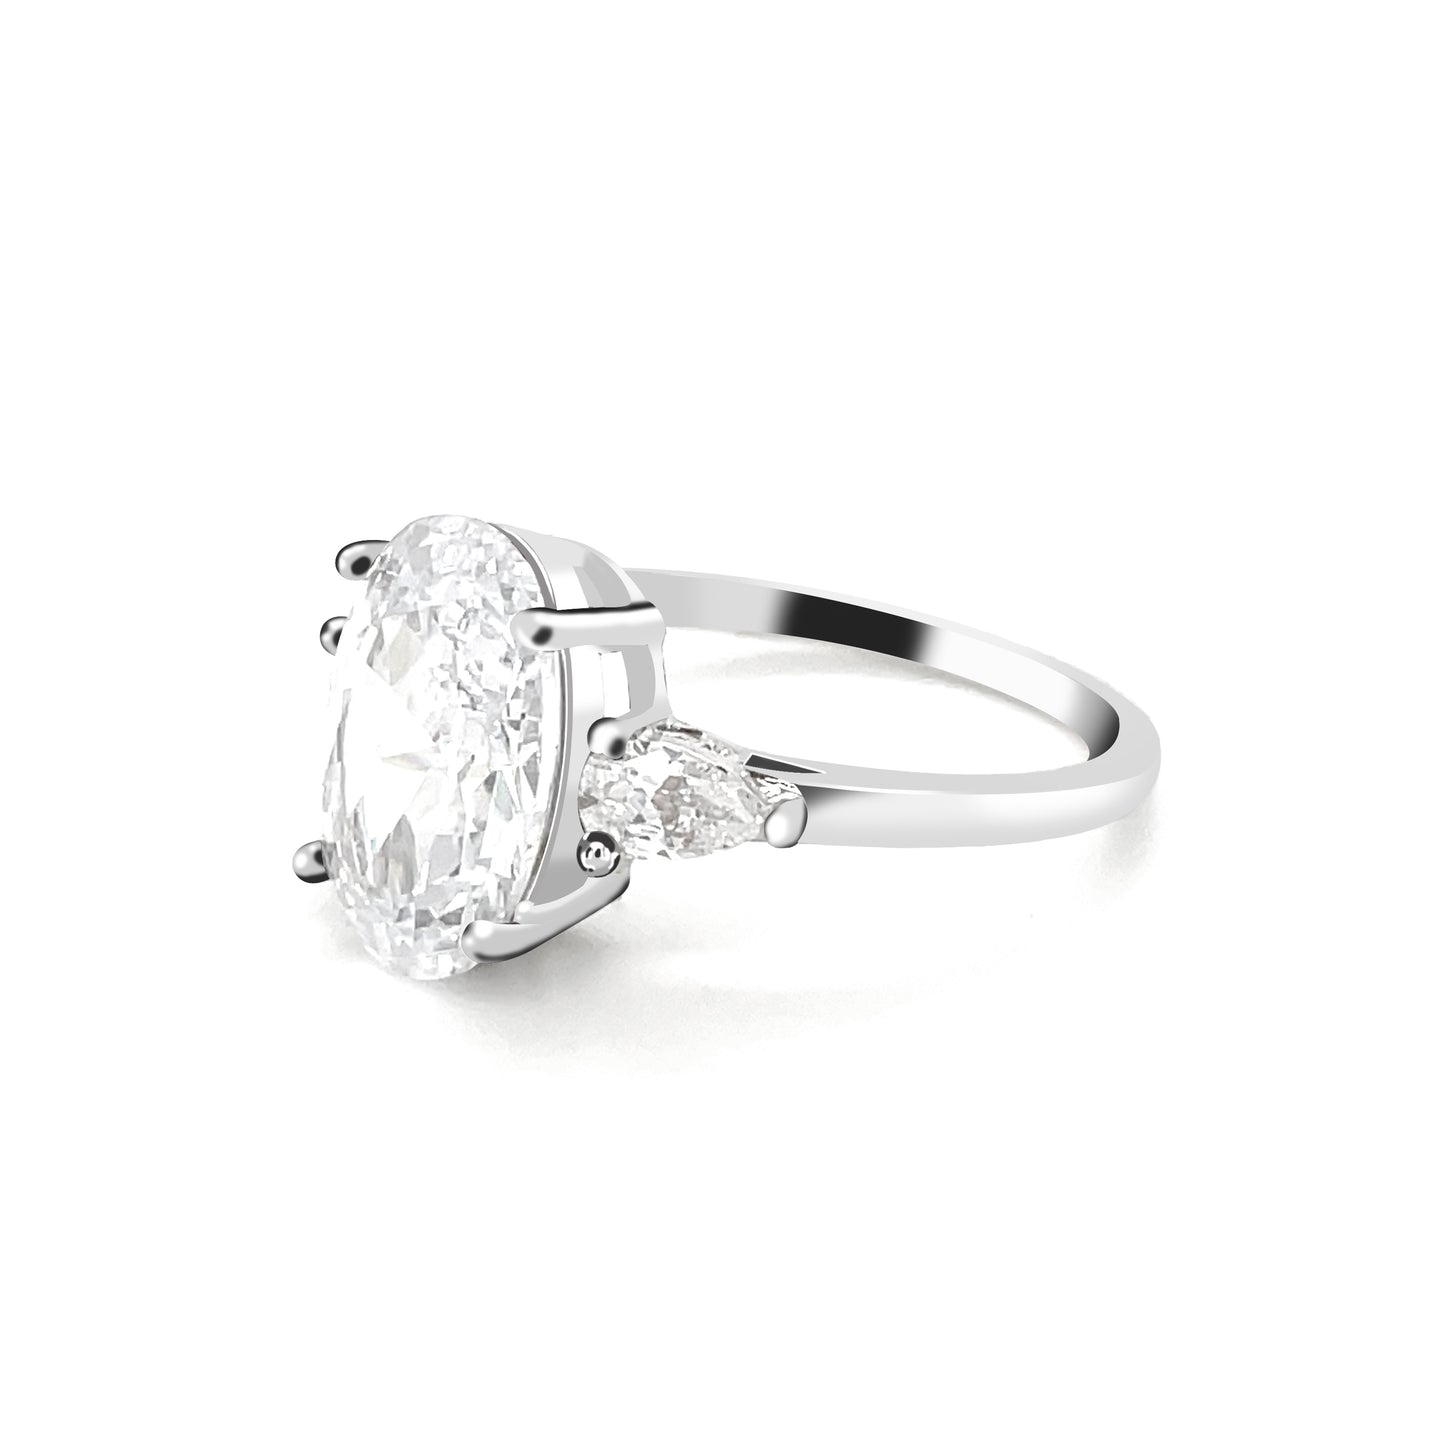 BMR33728WH - Oval Cut Solitaire Stone - Engagemet Ring